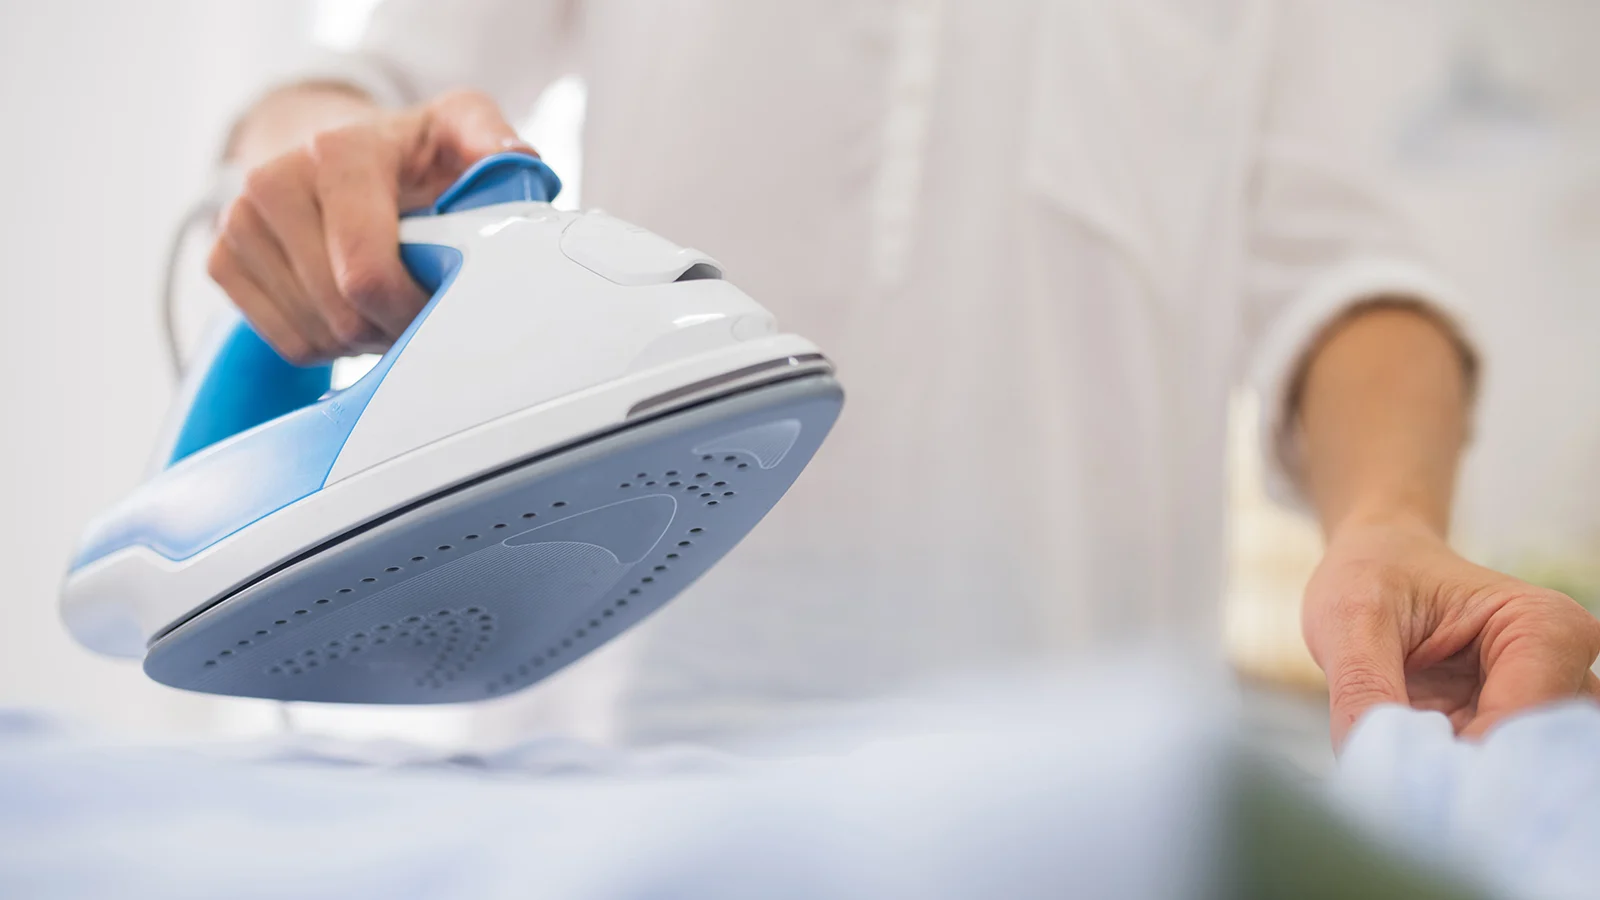 A woman is ironing a shirt with a blue and white iron.